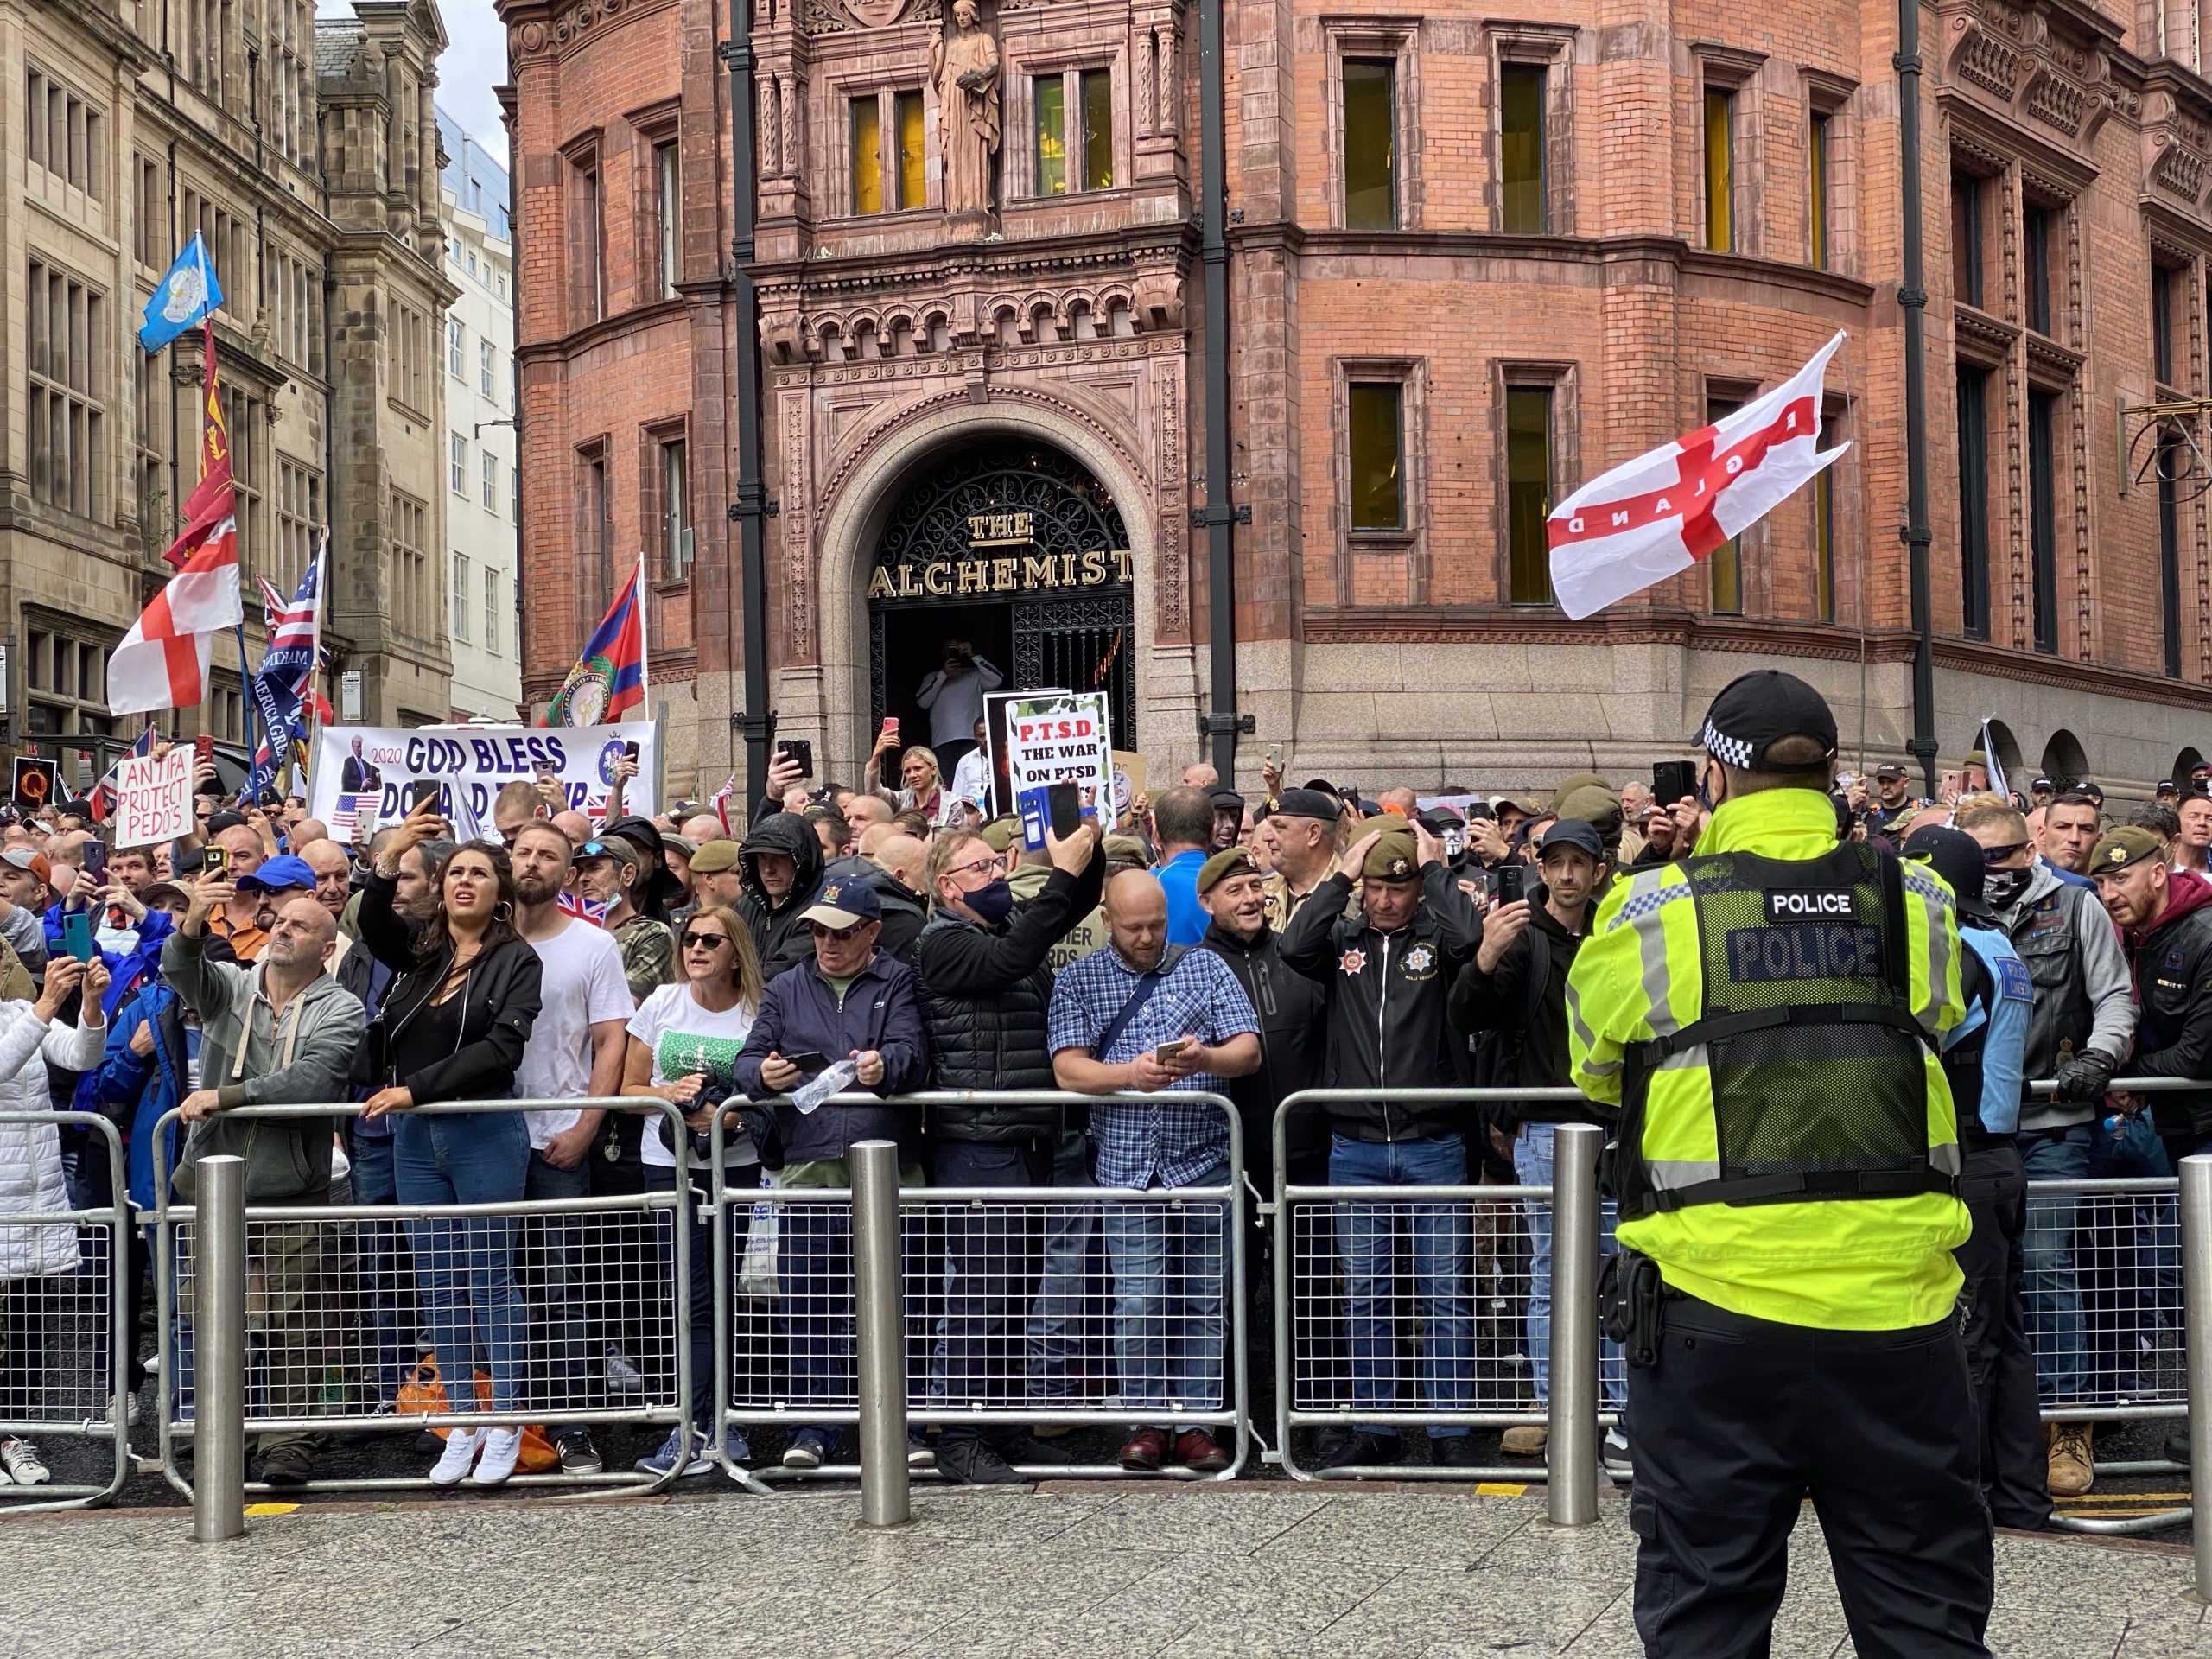 Nottingham city centre brought to a standstill by protests